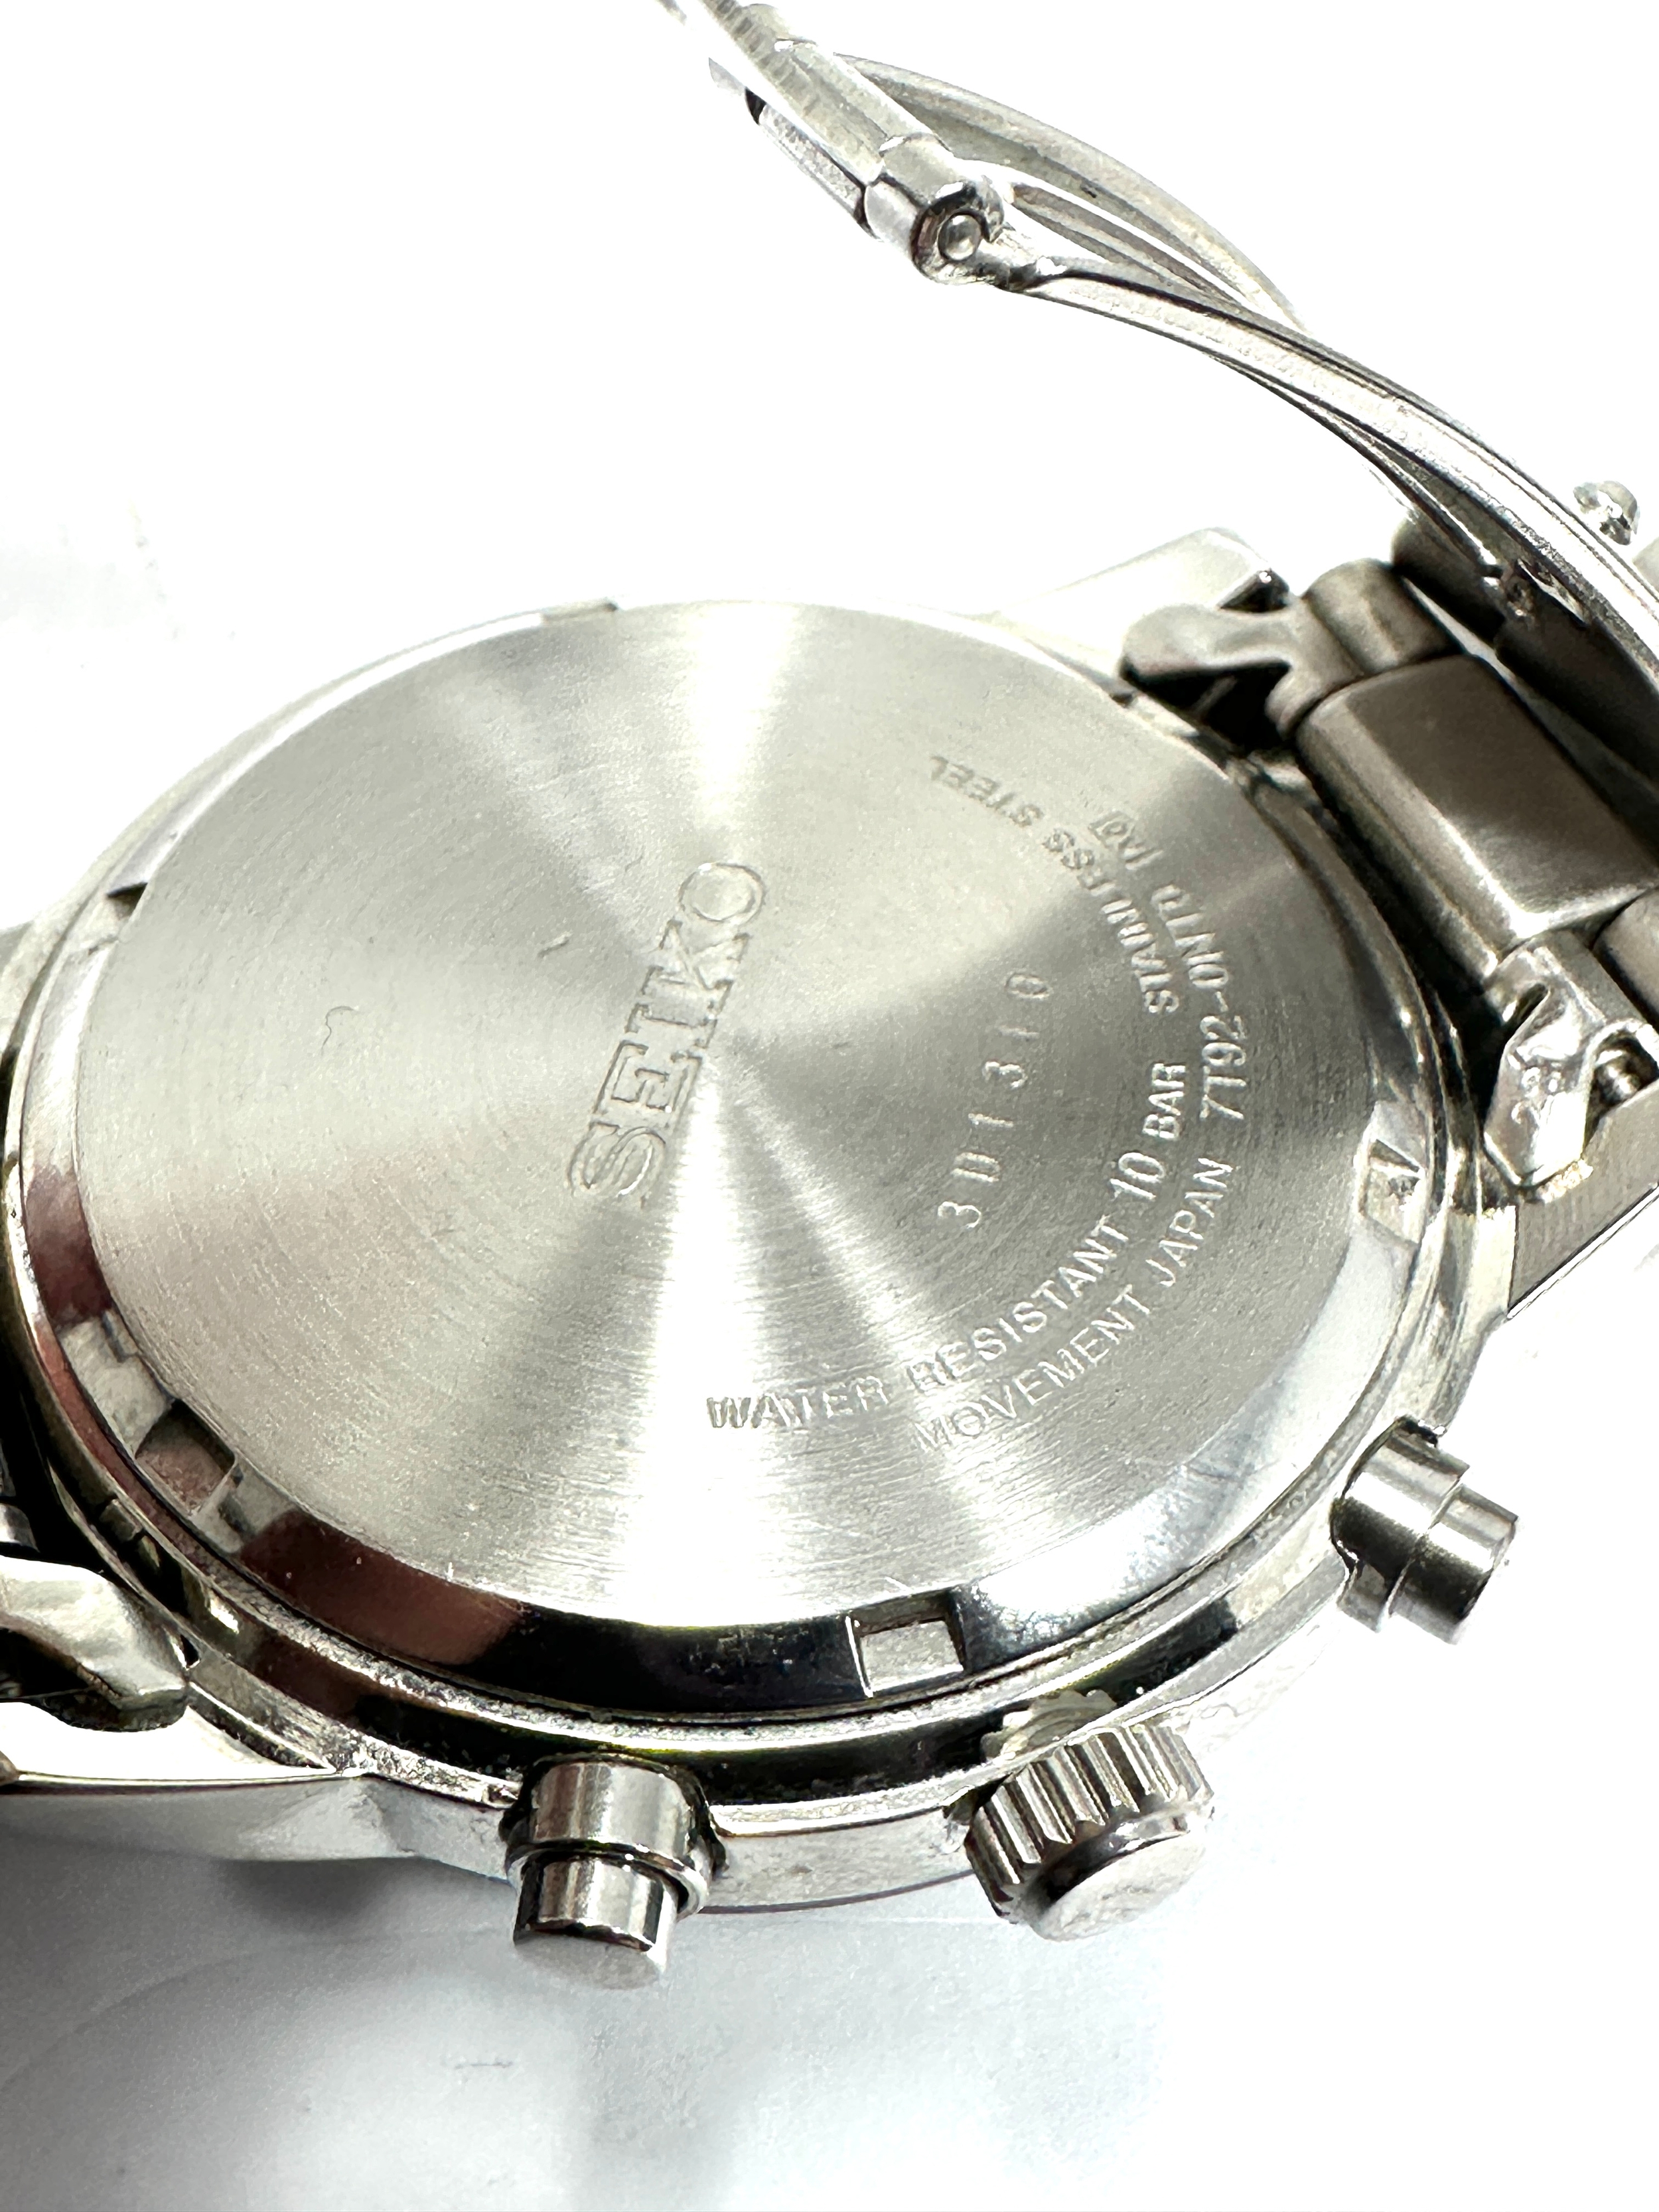 Gents Seiko date chronograph 100m 7t92- 0nt0 the watch does tick - Image 5 of 5